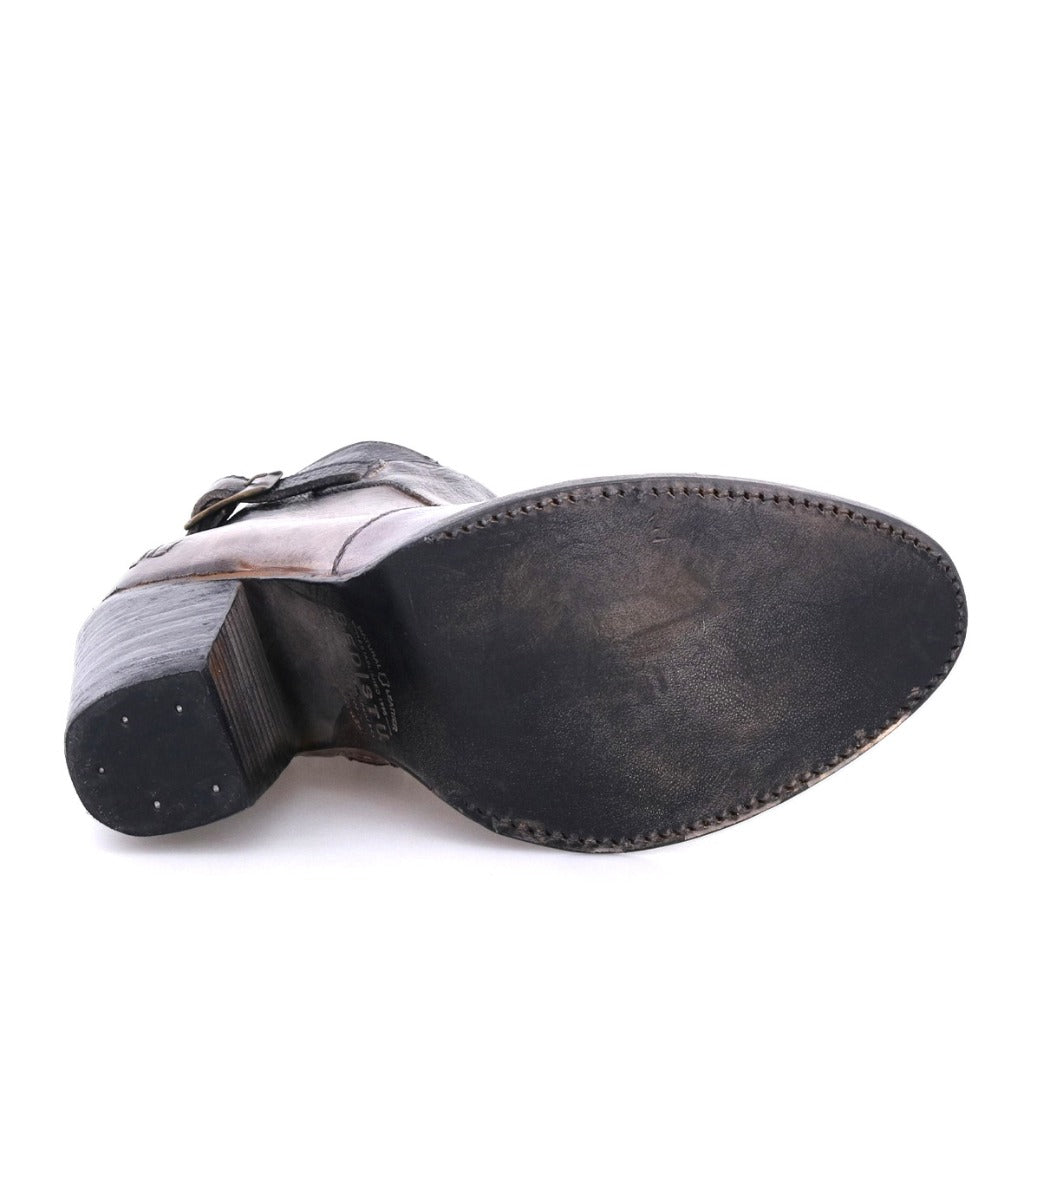 A pair of Isla leather shoes with a black sole by Bed Stu.